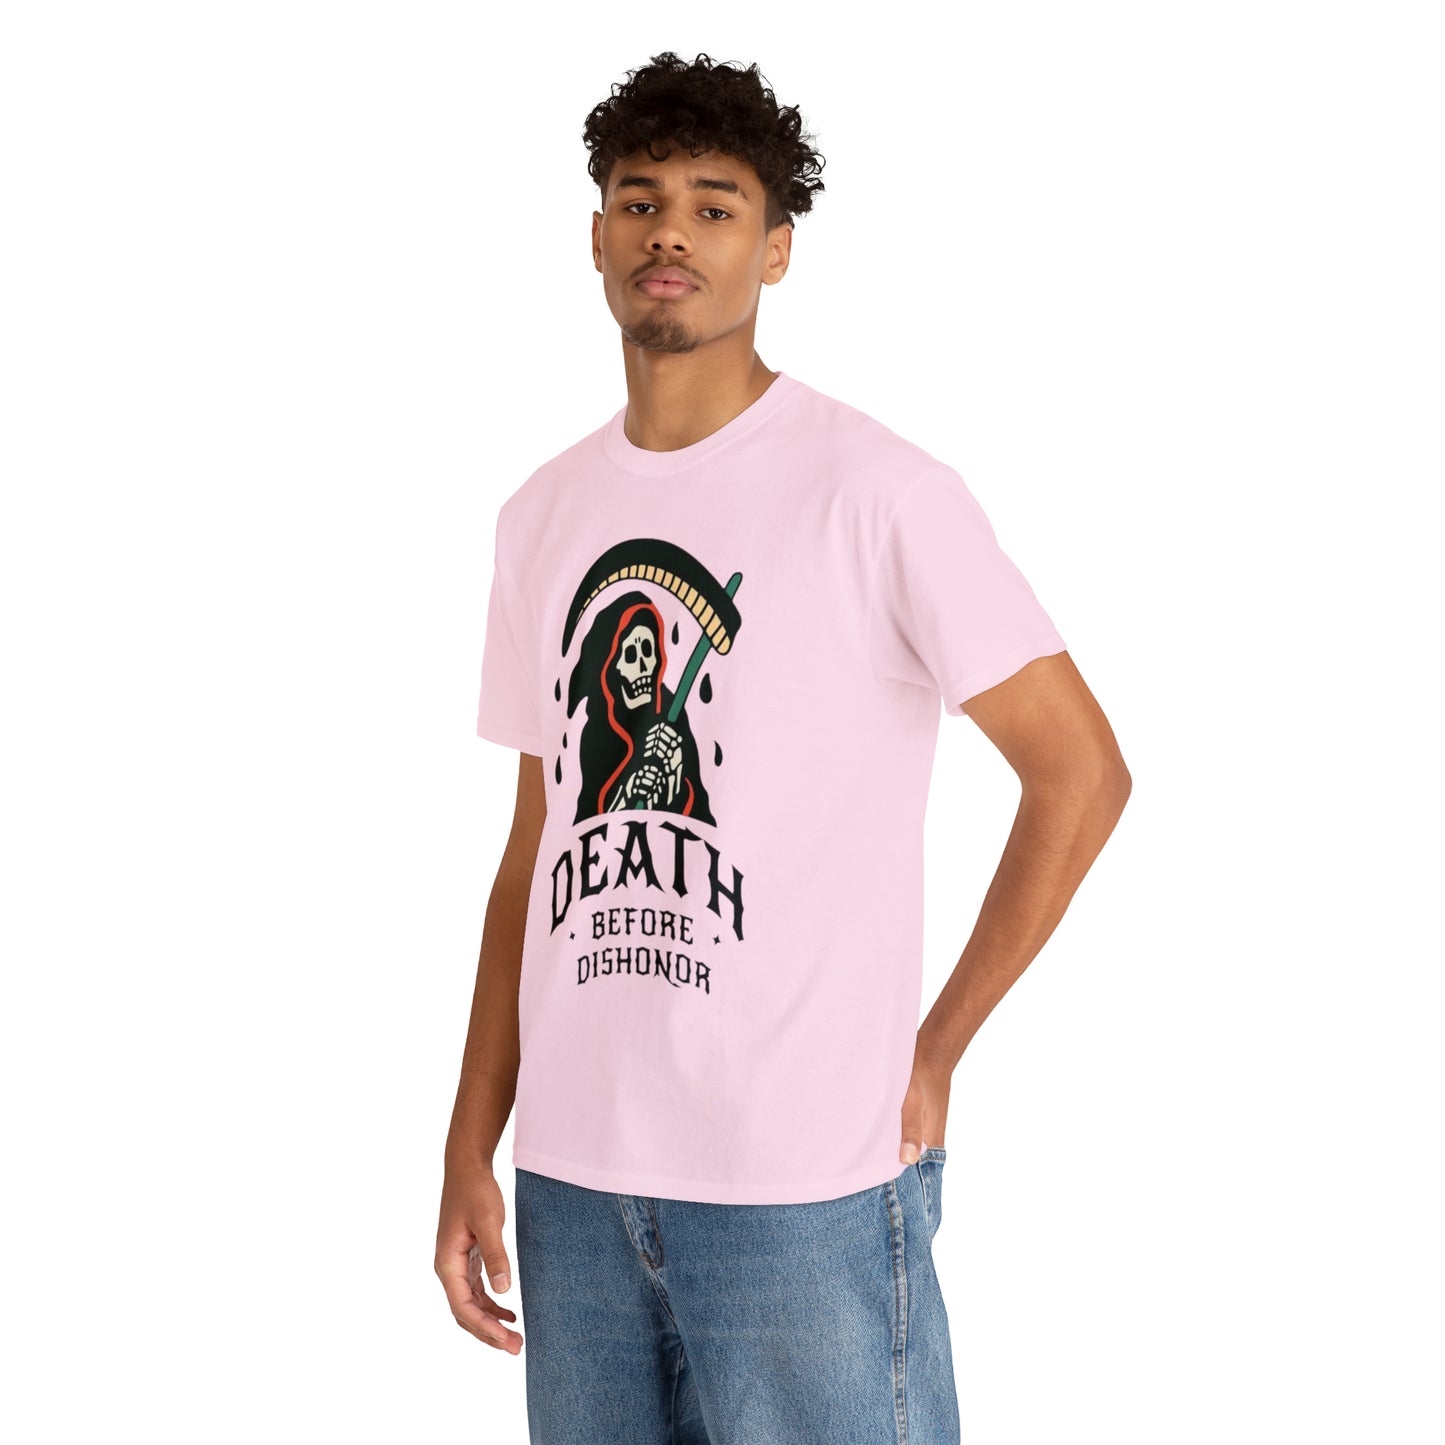 Death before dishonor Tee